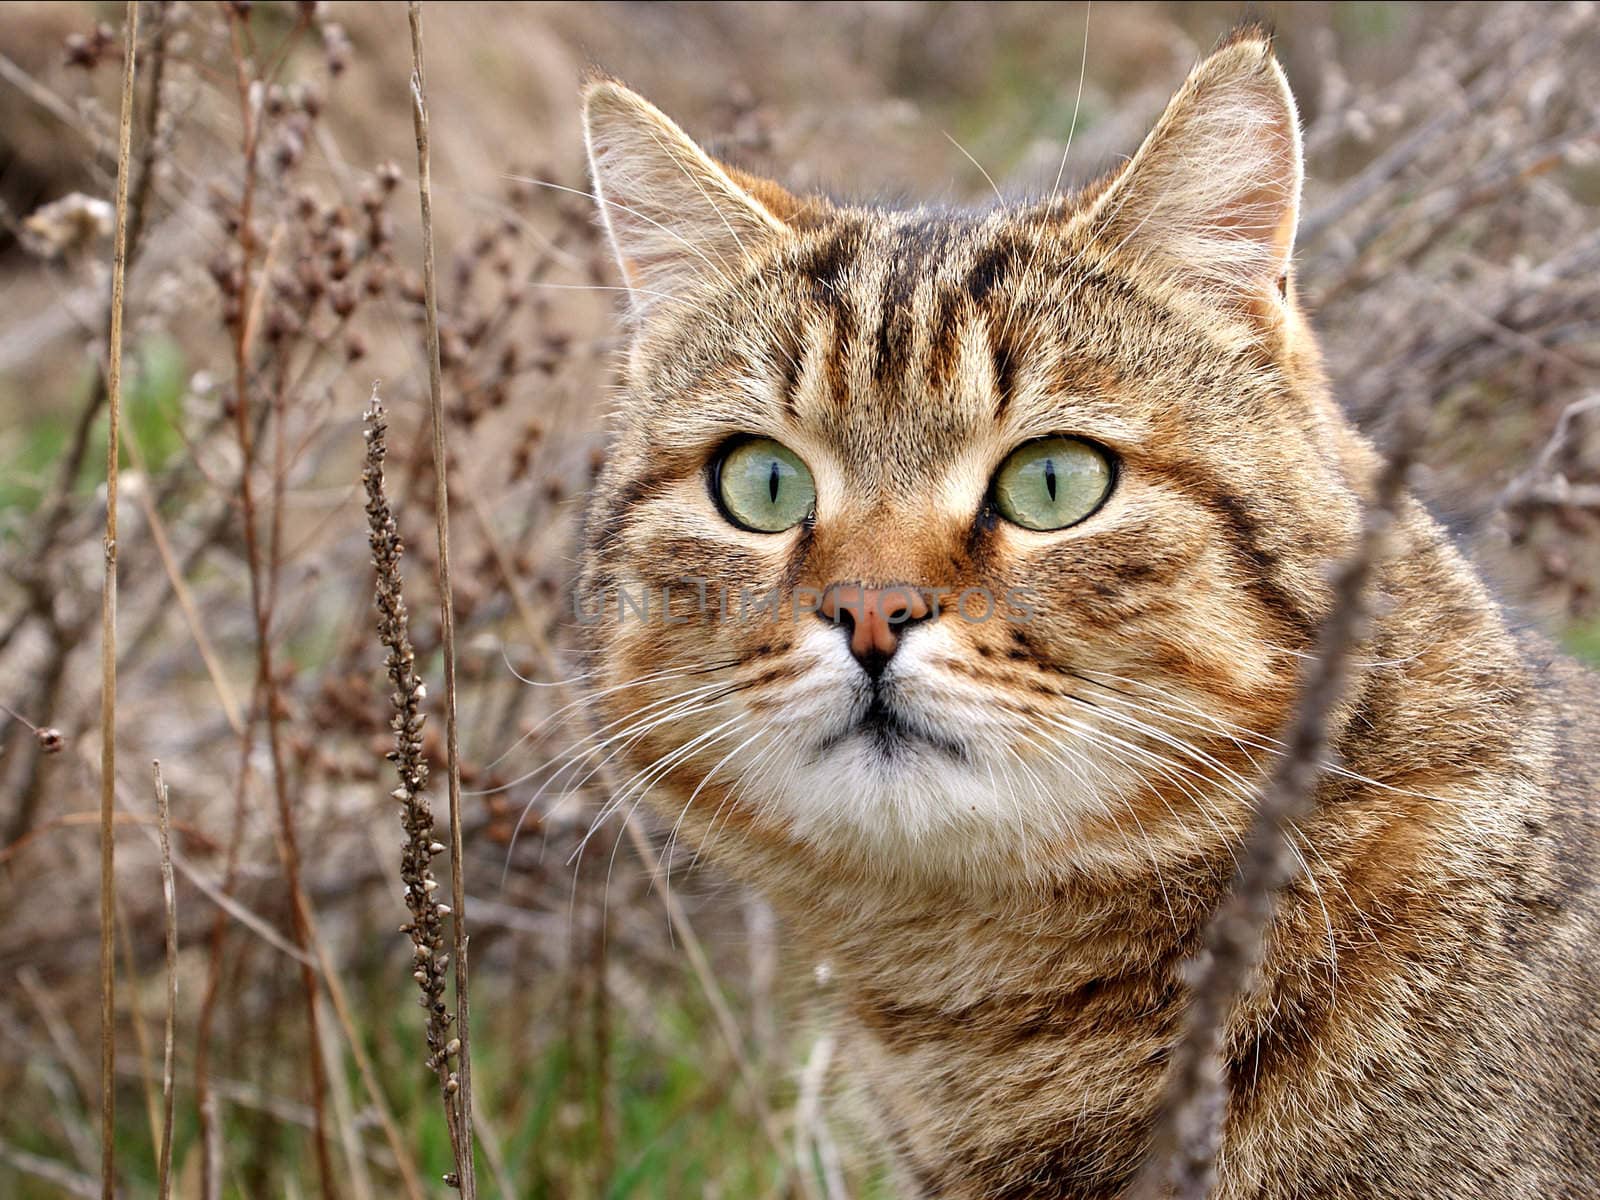 A hunting cat in dry grass